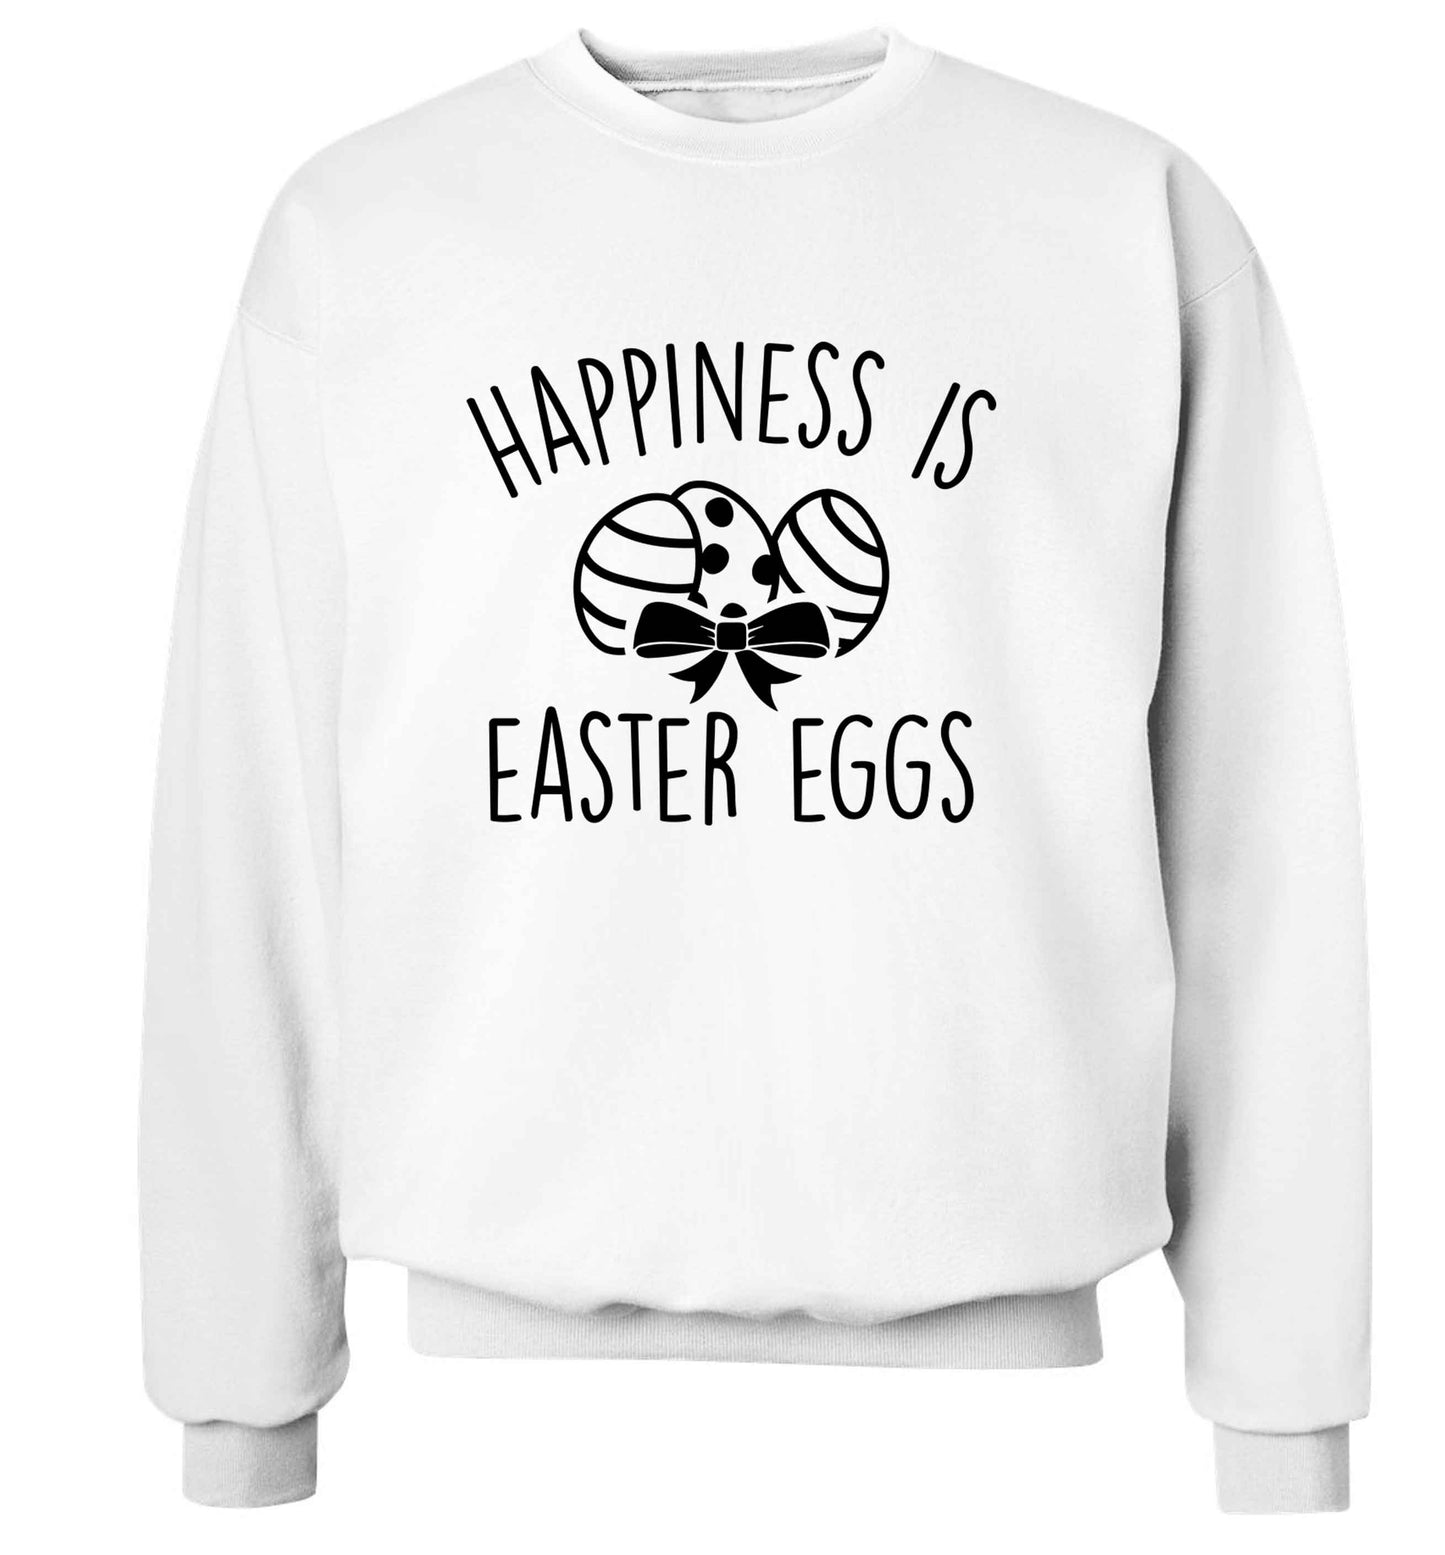 Happiness is Easter eggs adult's unisex white sweater 2XL